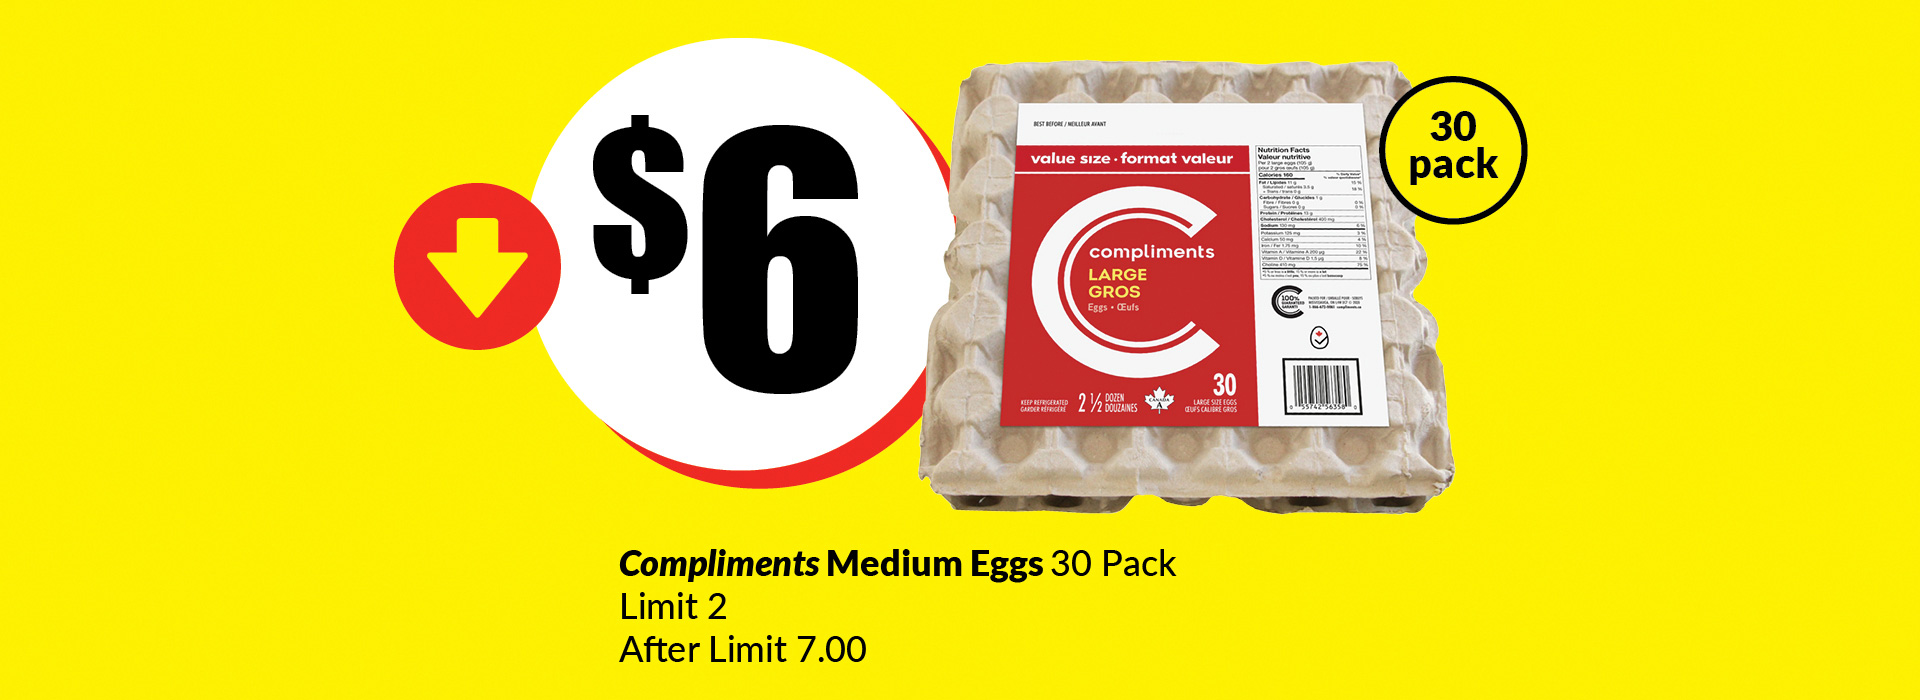 Text Reading 'Buy 30 Pack of Compliments Medium Eggs with the limit of 2 at $6. After limit, the cost becomes $7.'